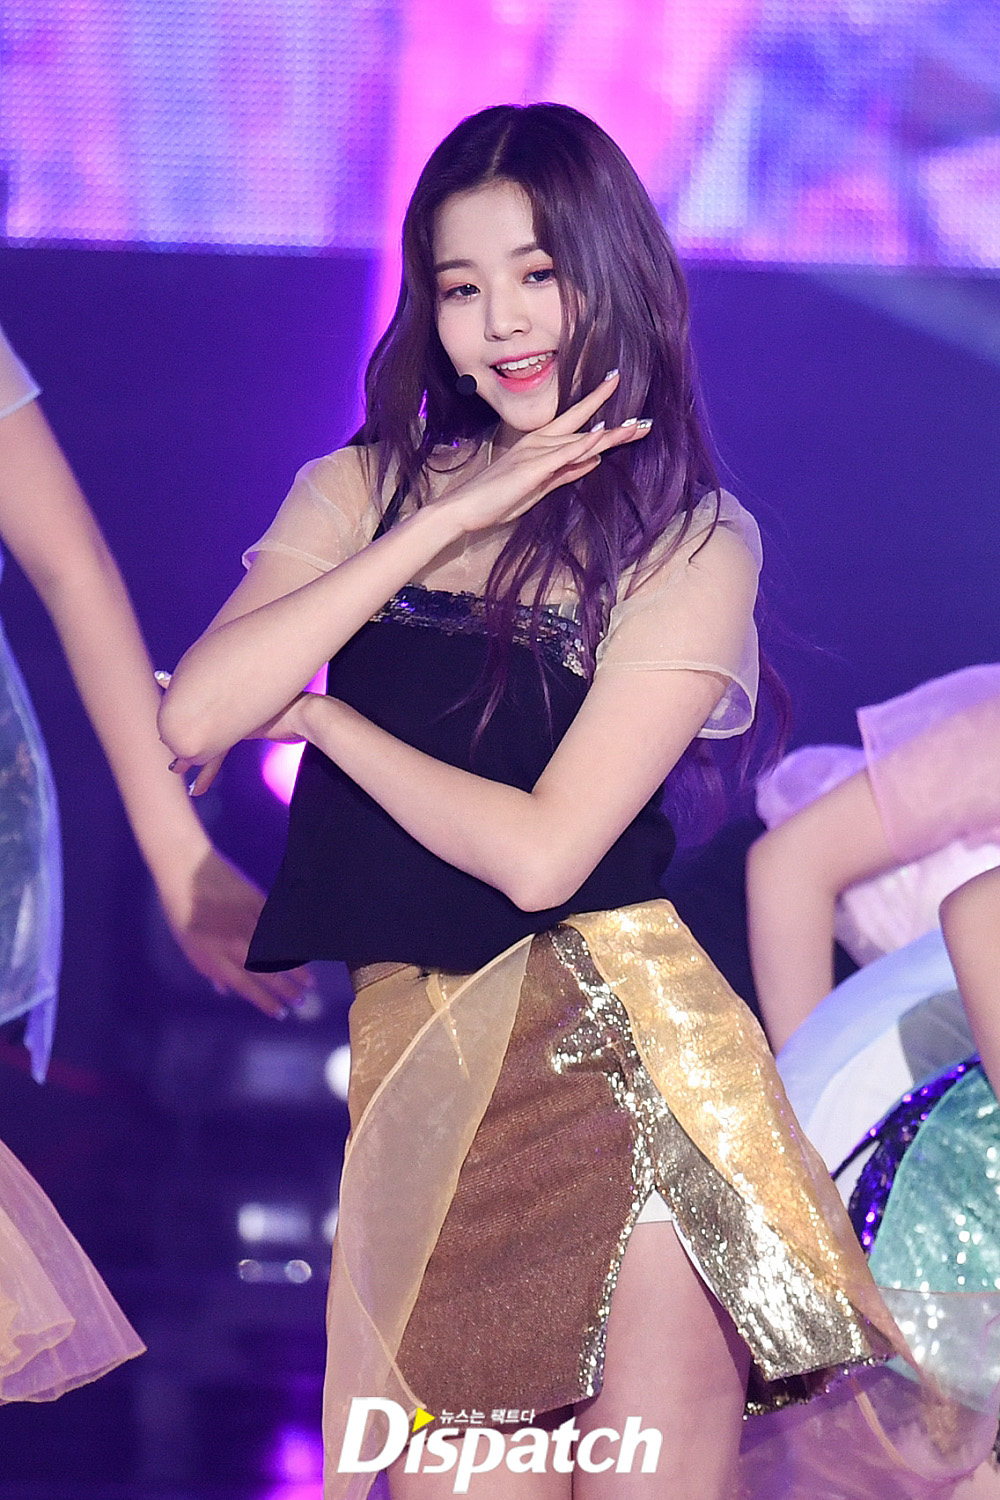 SBS MTV The Show live broadcast was held at SBS Prism Tower in Sangam-dong, Mapo-gu, Seoul on the afternoon of the 21st.Izone Jang Won-young showed a fresh atmosphere on the day.On the other hand, the live stage of The Show will feature Blockby Bastaz, Pentagon, Momoland, Dia, JBS95, KARD, Eyes One, Park Girl, Everglow, Ko Seung-hyung, Dream Note, Hot Place, VAV and Kang Si-won.fresh youngestI ripped the comics.a girls purity